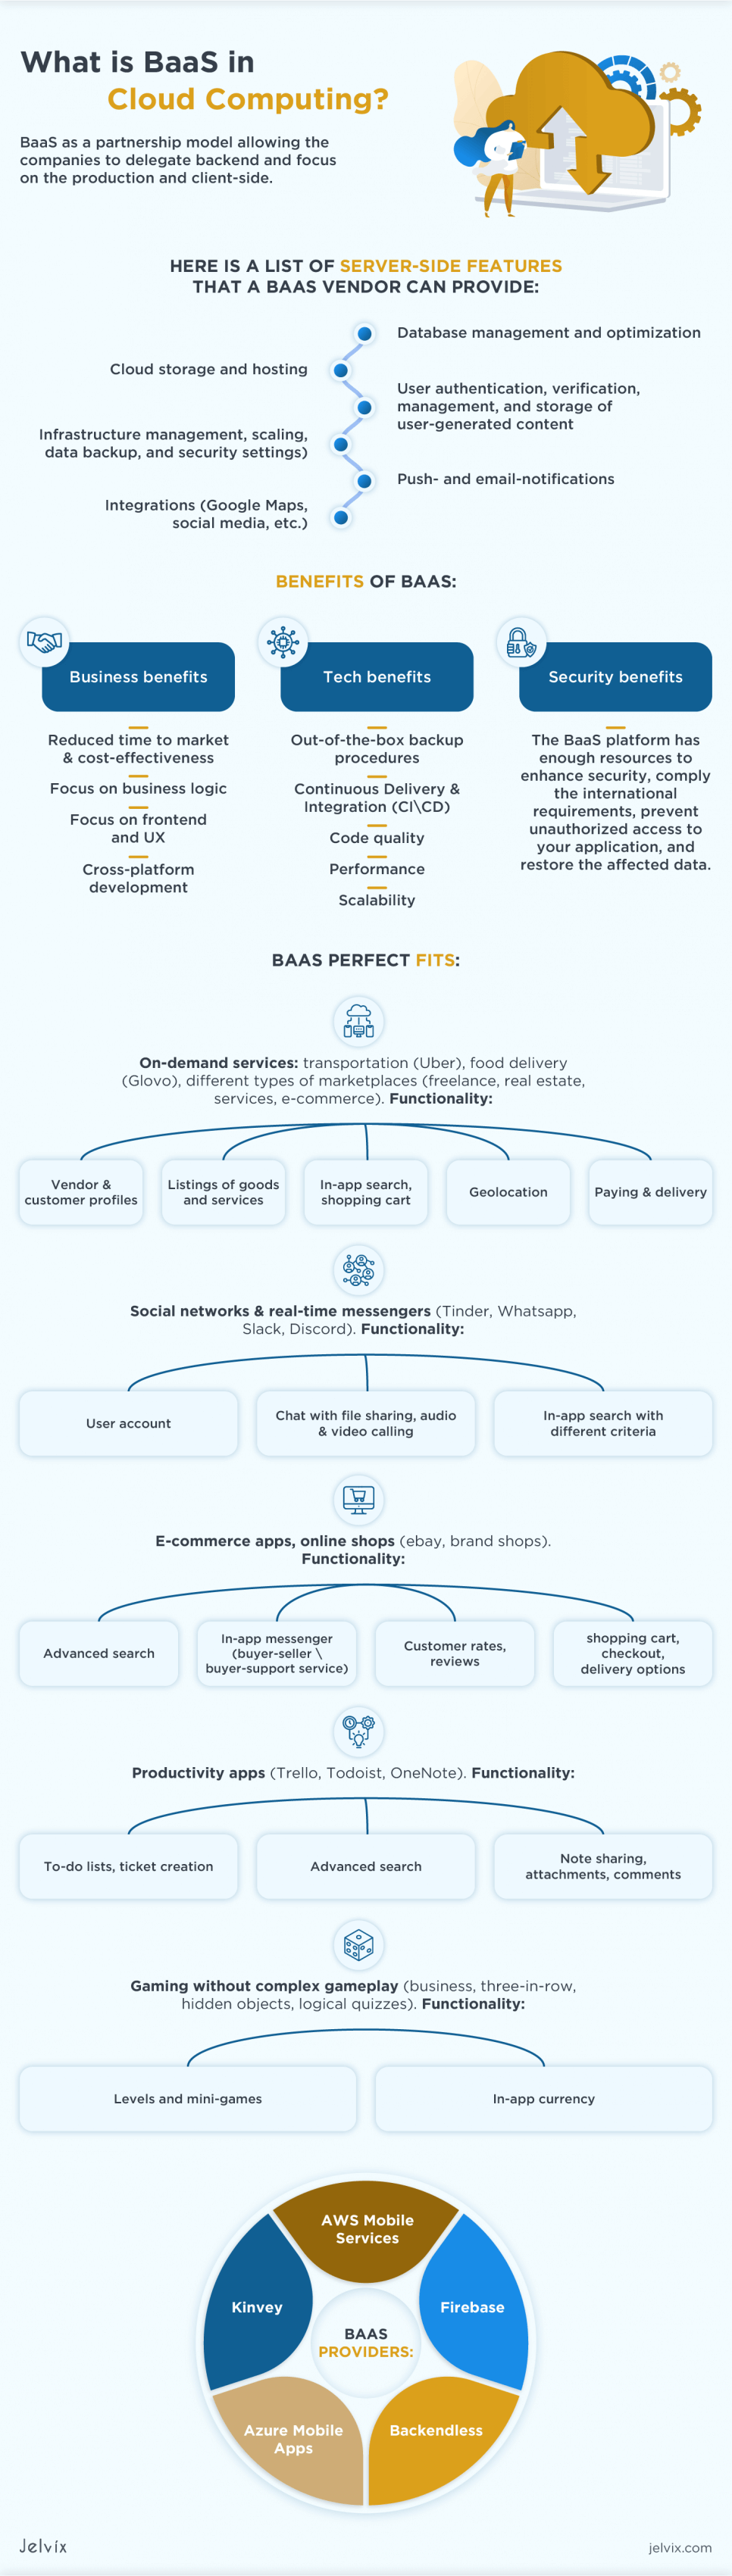 How to use Baas